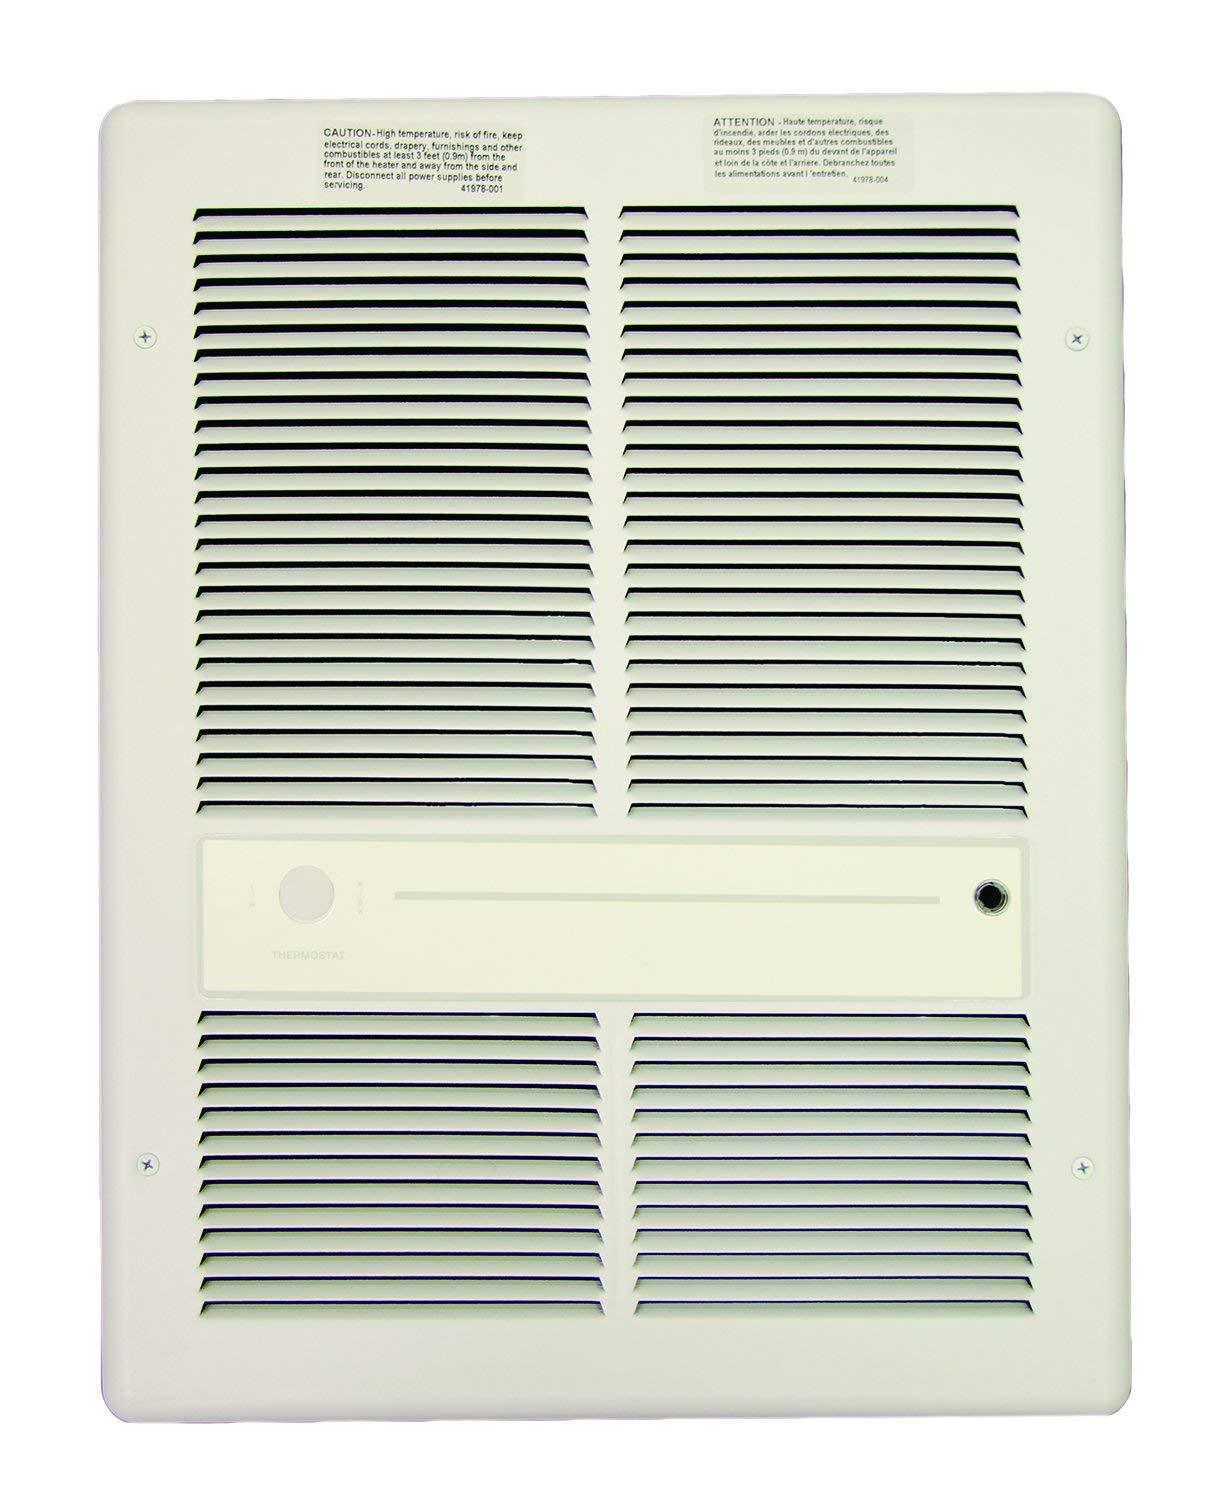 TPI 2000W 277V 3310 Series Fan Forced Wall Heater (White) - Without Summer Fan Switch - No Thermostat - G3314RPW